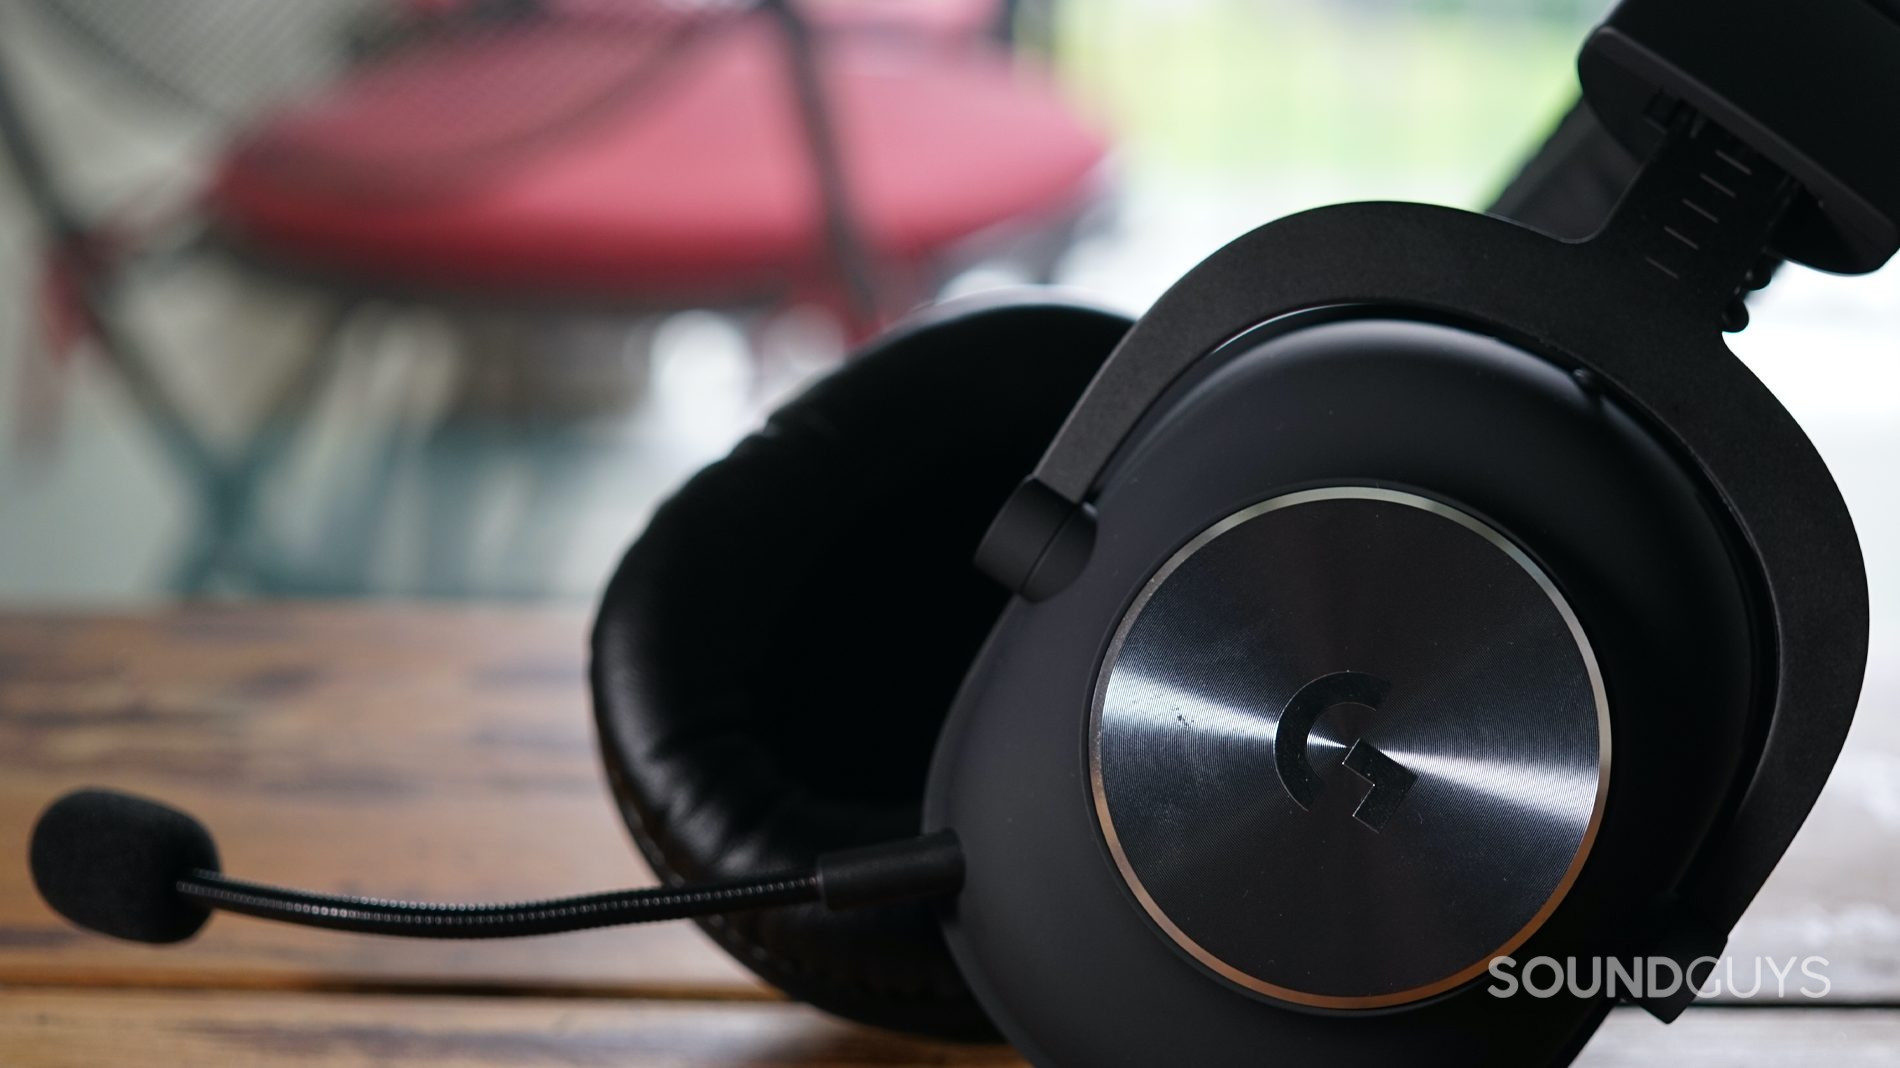 Logitech G Pro X review: A great PC and productivity headset